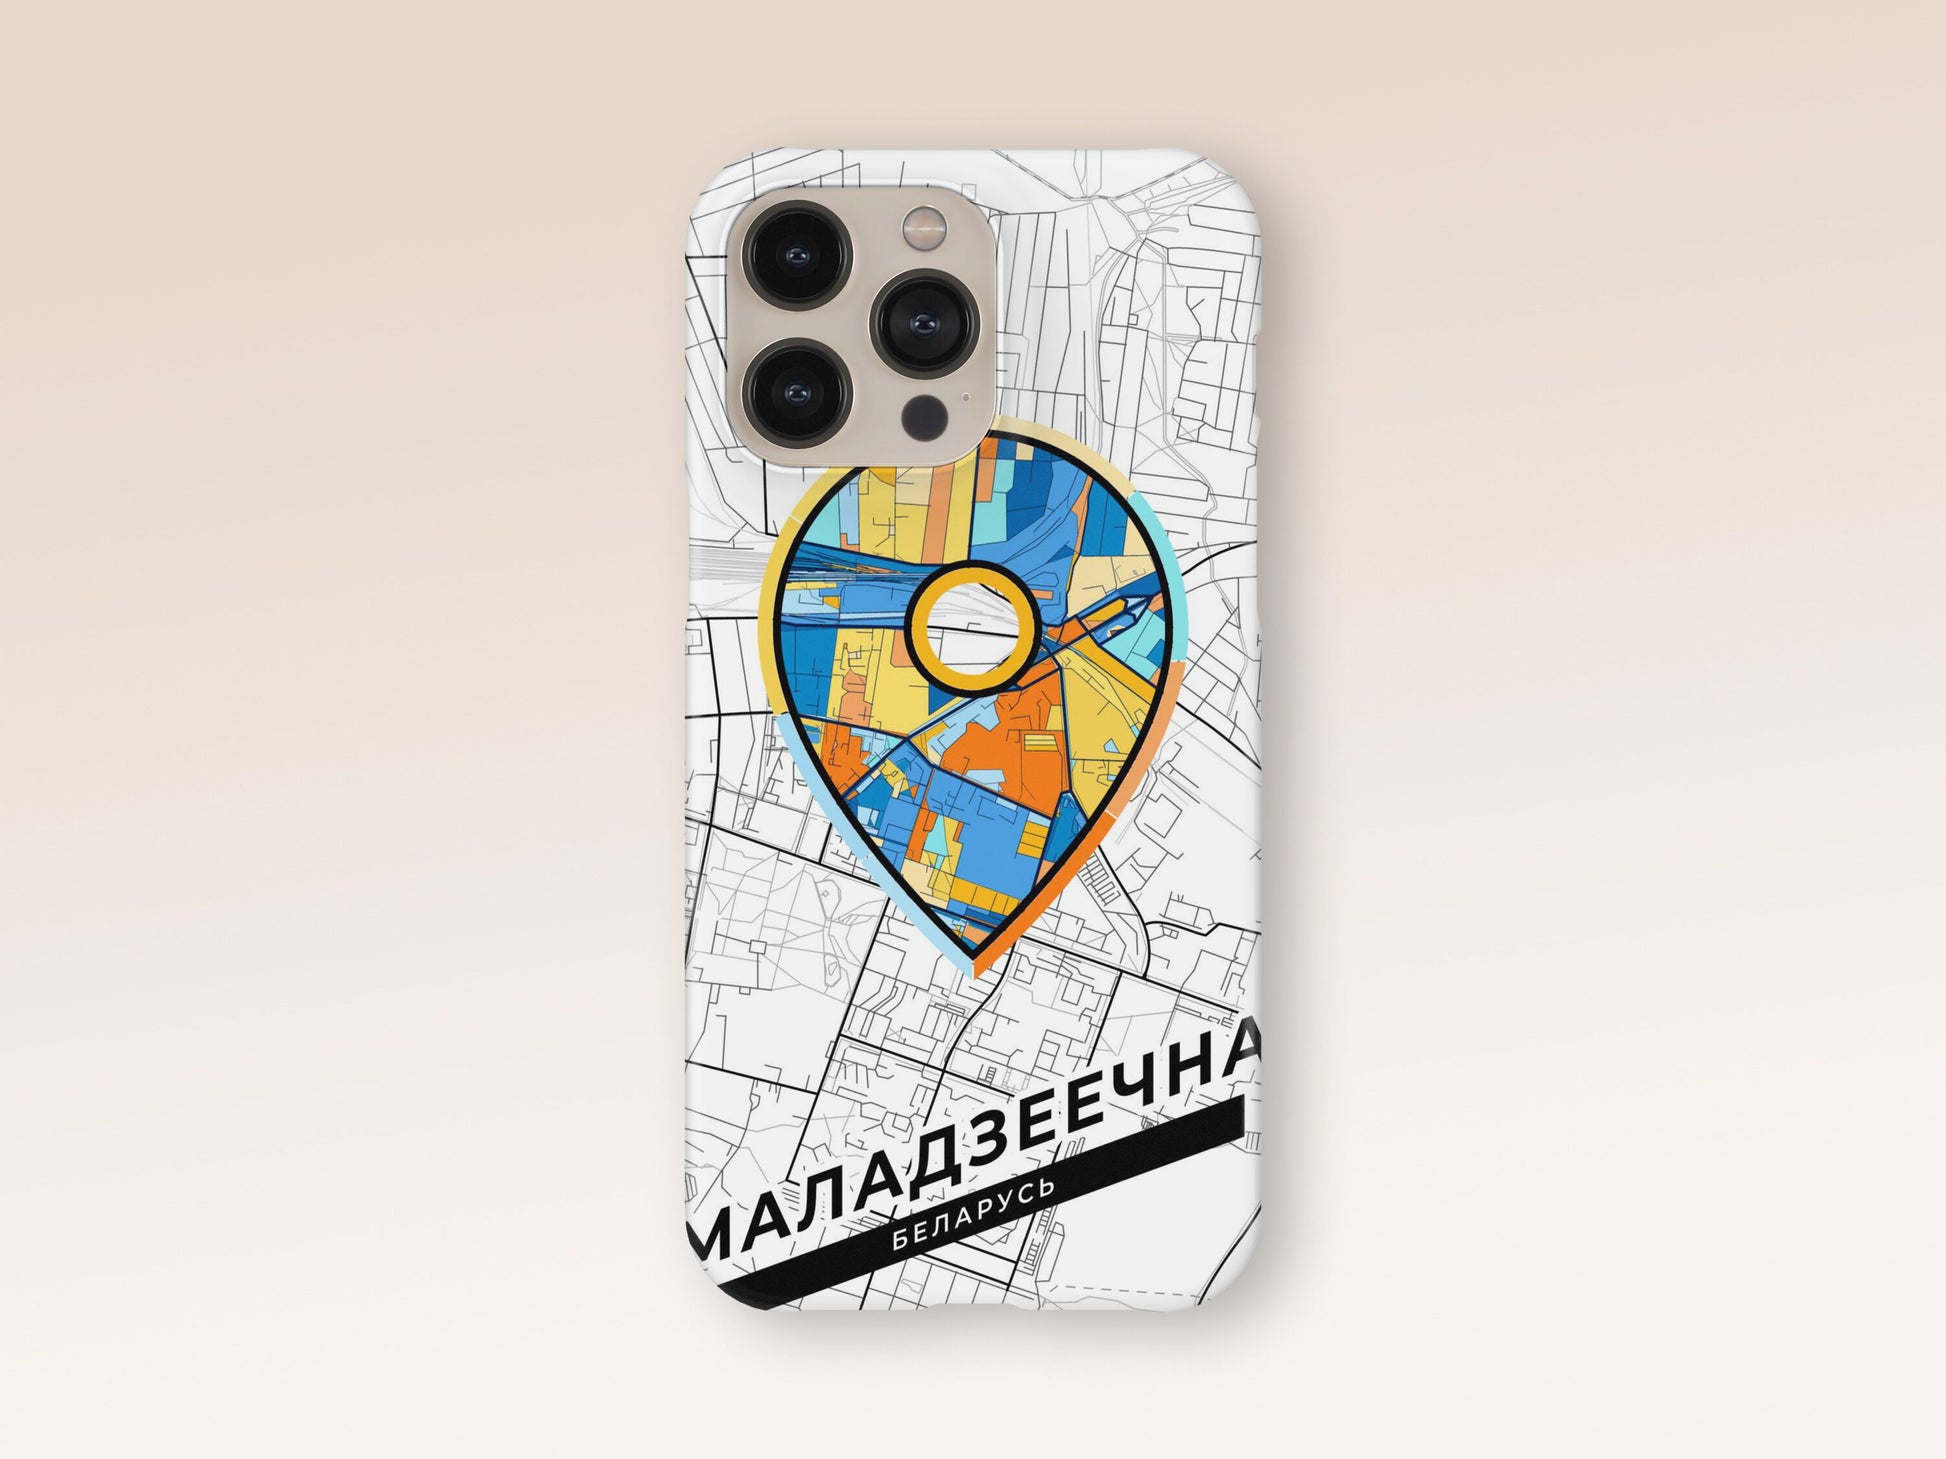 Маладзеечна Беларусь slim phone case with colorful icon. Birthday, wedding or housewarming gift. Couple match cases. 1